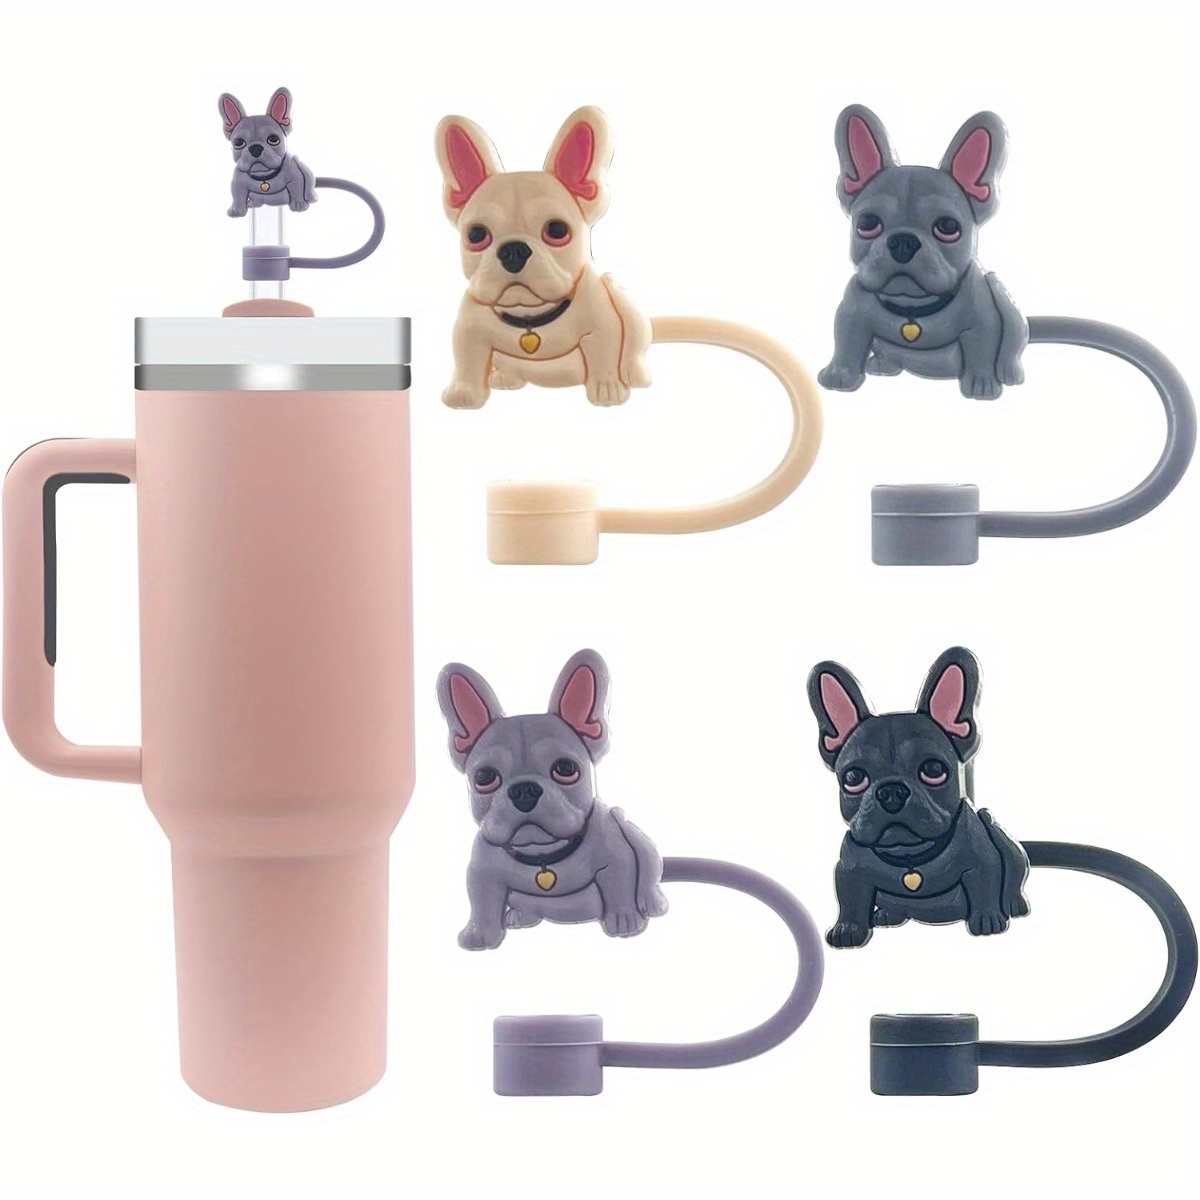 

4-pack Cute Dog Silicone Straw Covers For Stanley 20/30/40 Oz Tumblers - Dust-proof, Fits Handle Cups